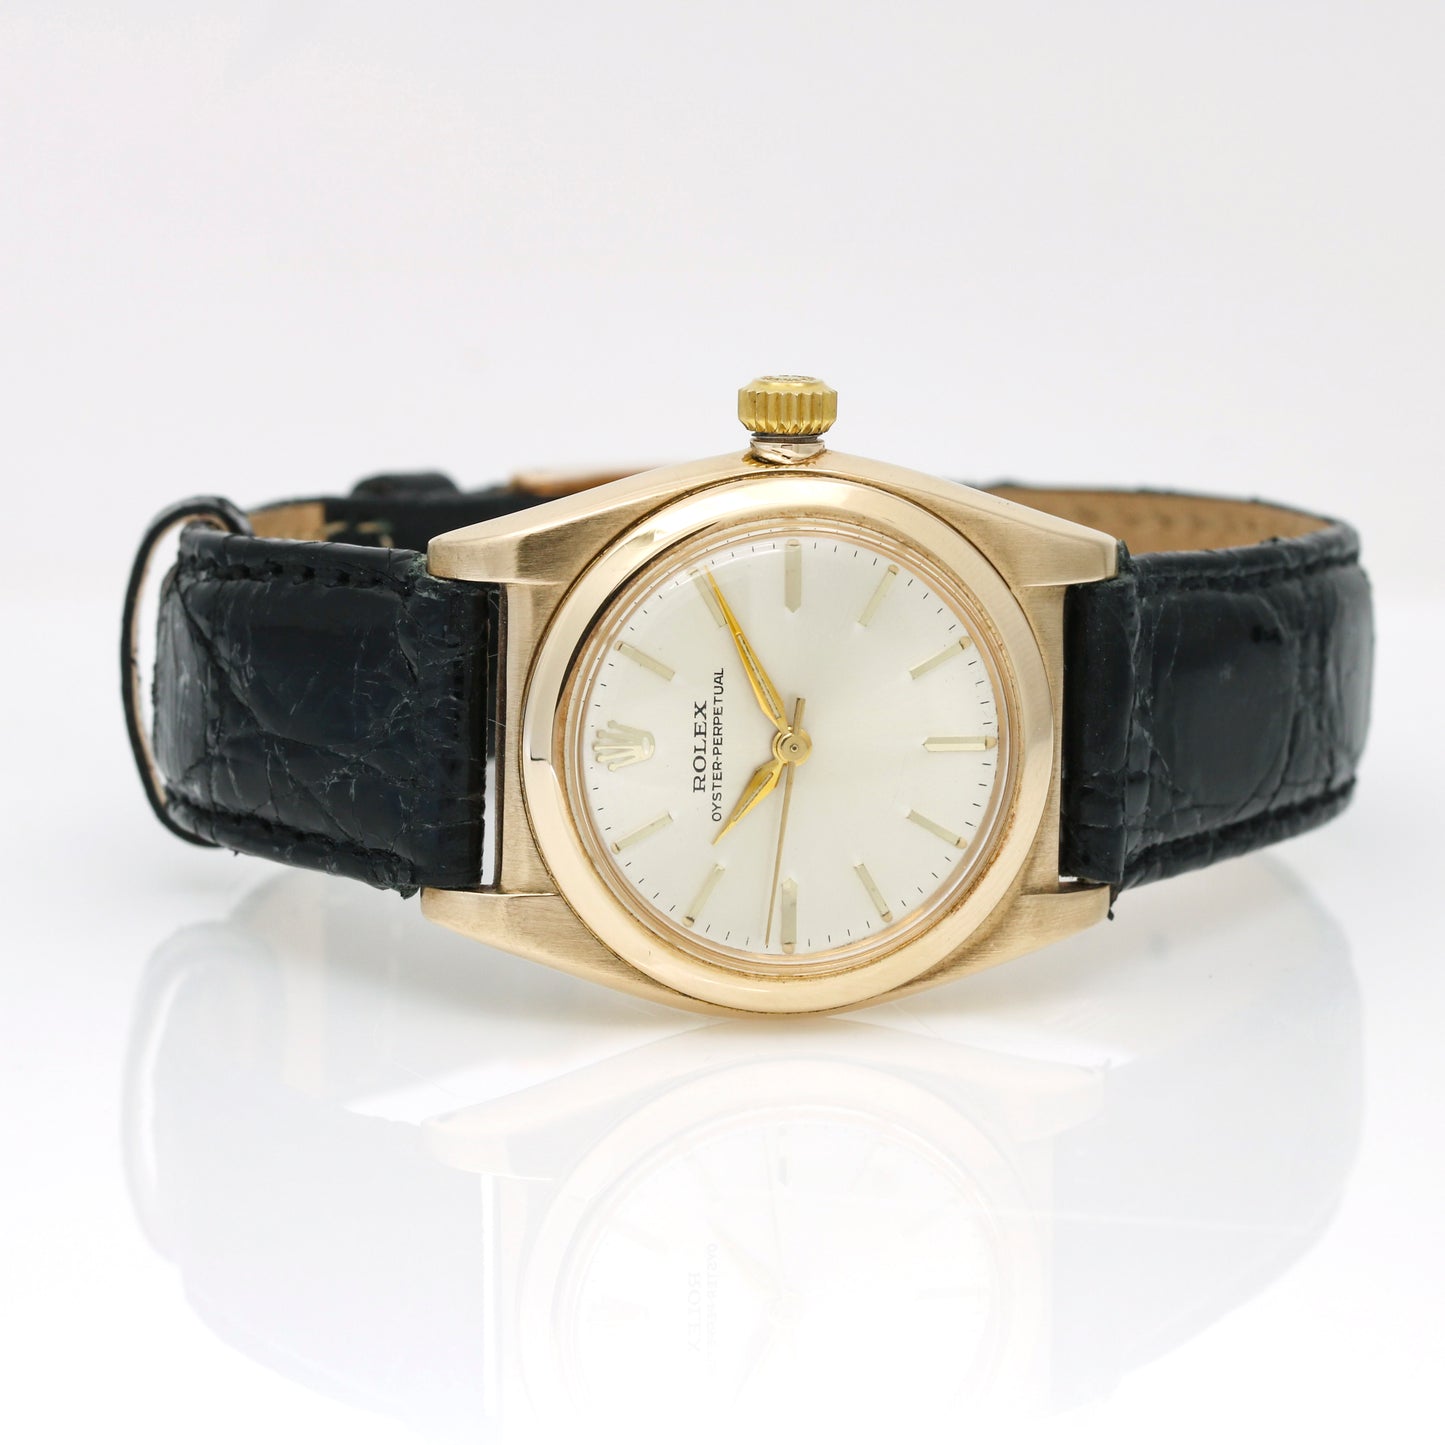 1937 Rolex Oyster Perpetual 14k Yellow Gold Bubble Back Watch 3131